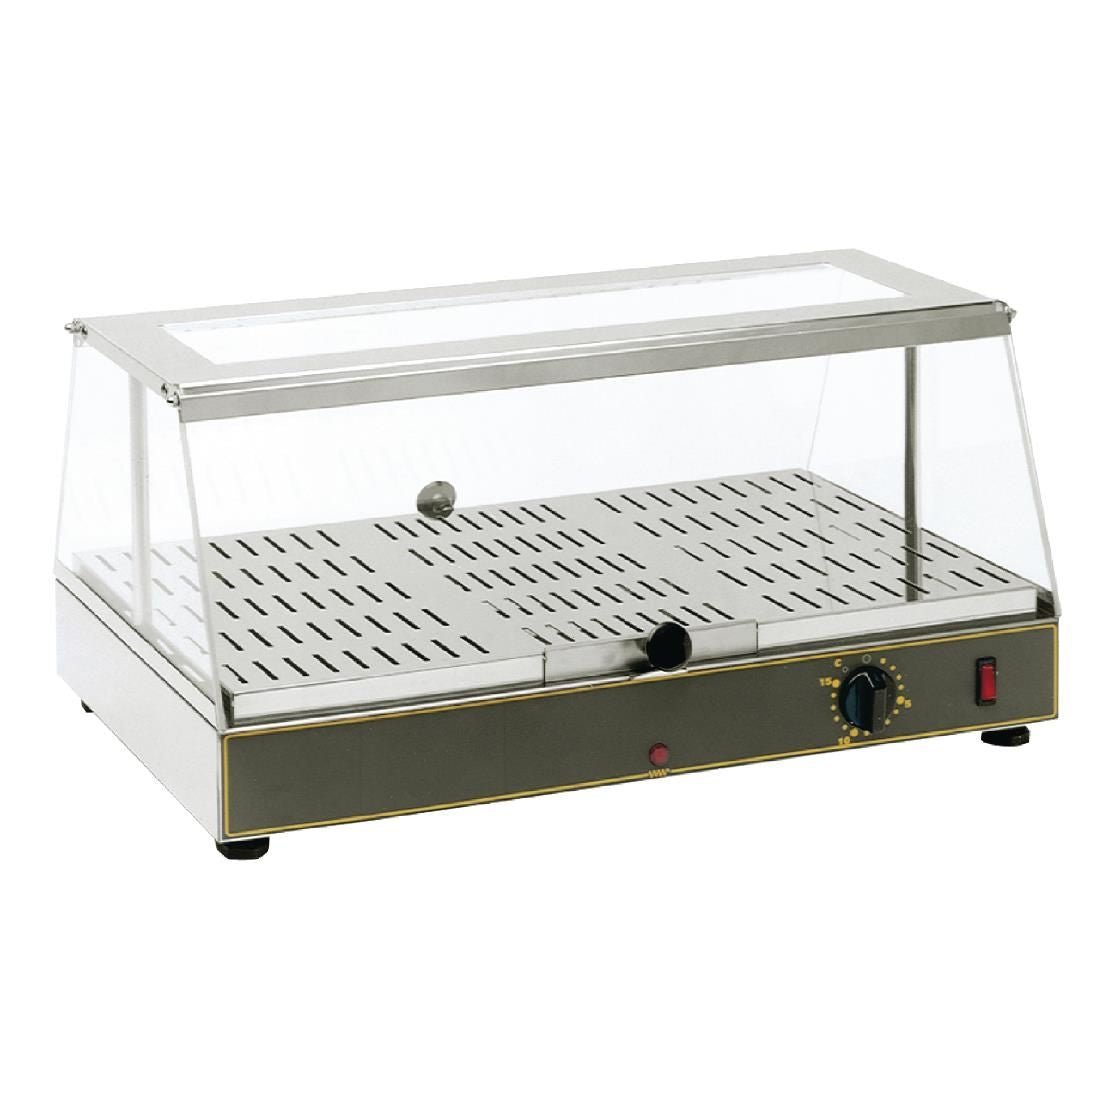 GD352 Roller Grill Heated Food Display WD100 JD Catering Equipment Solutions Ltd